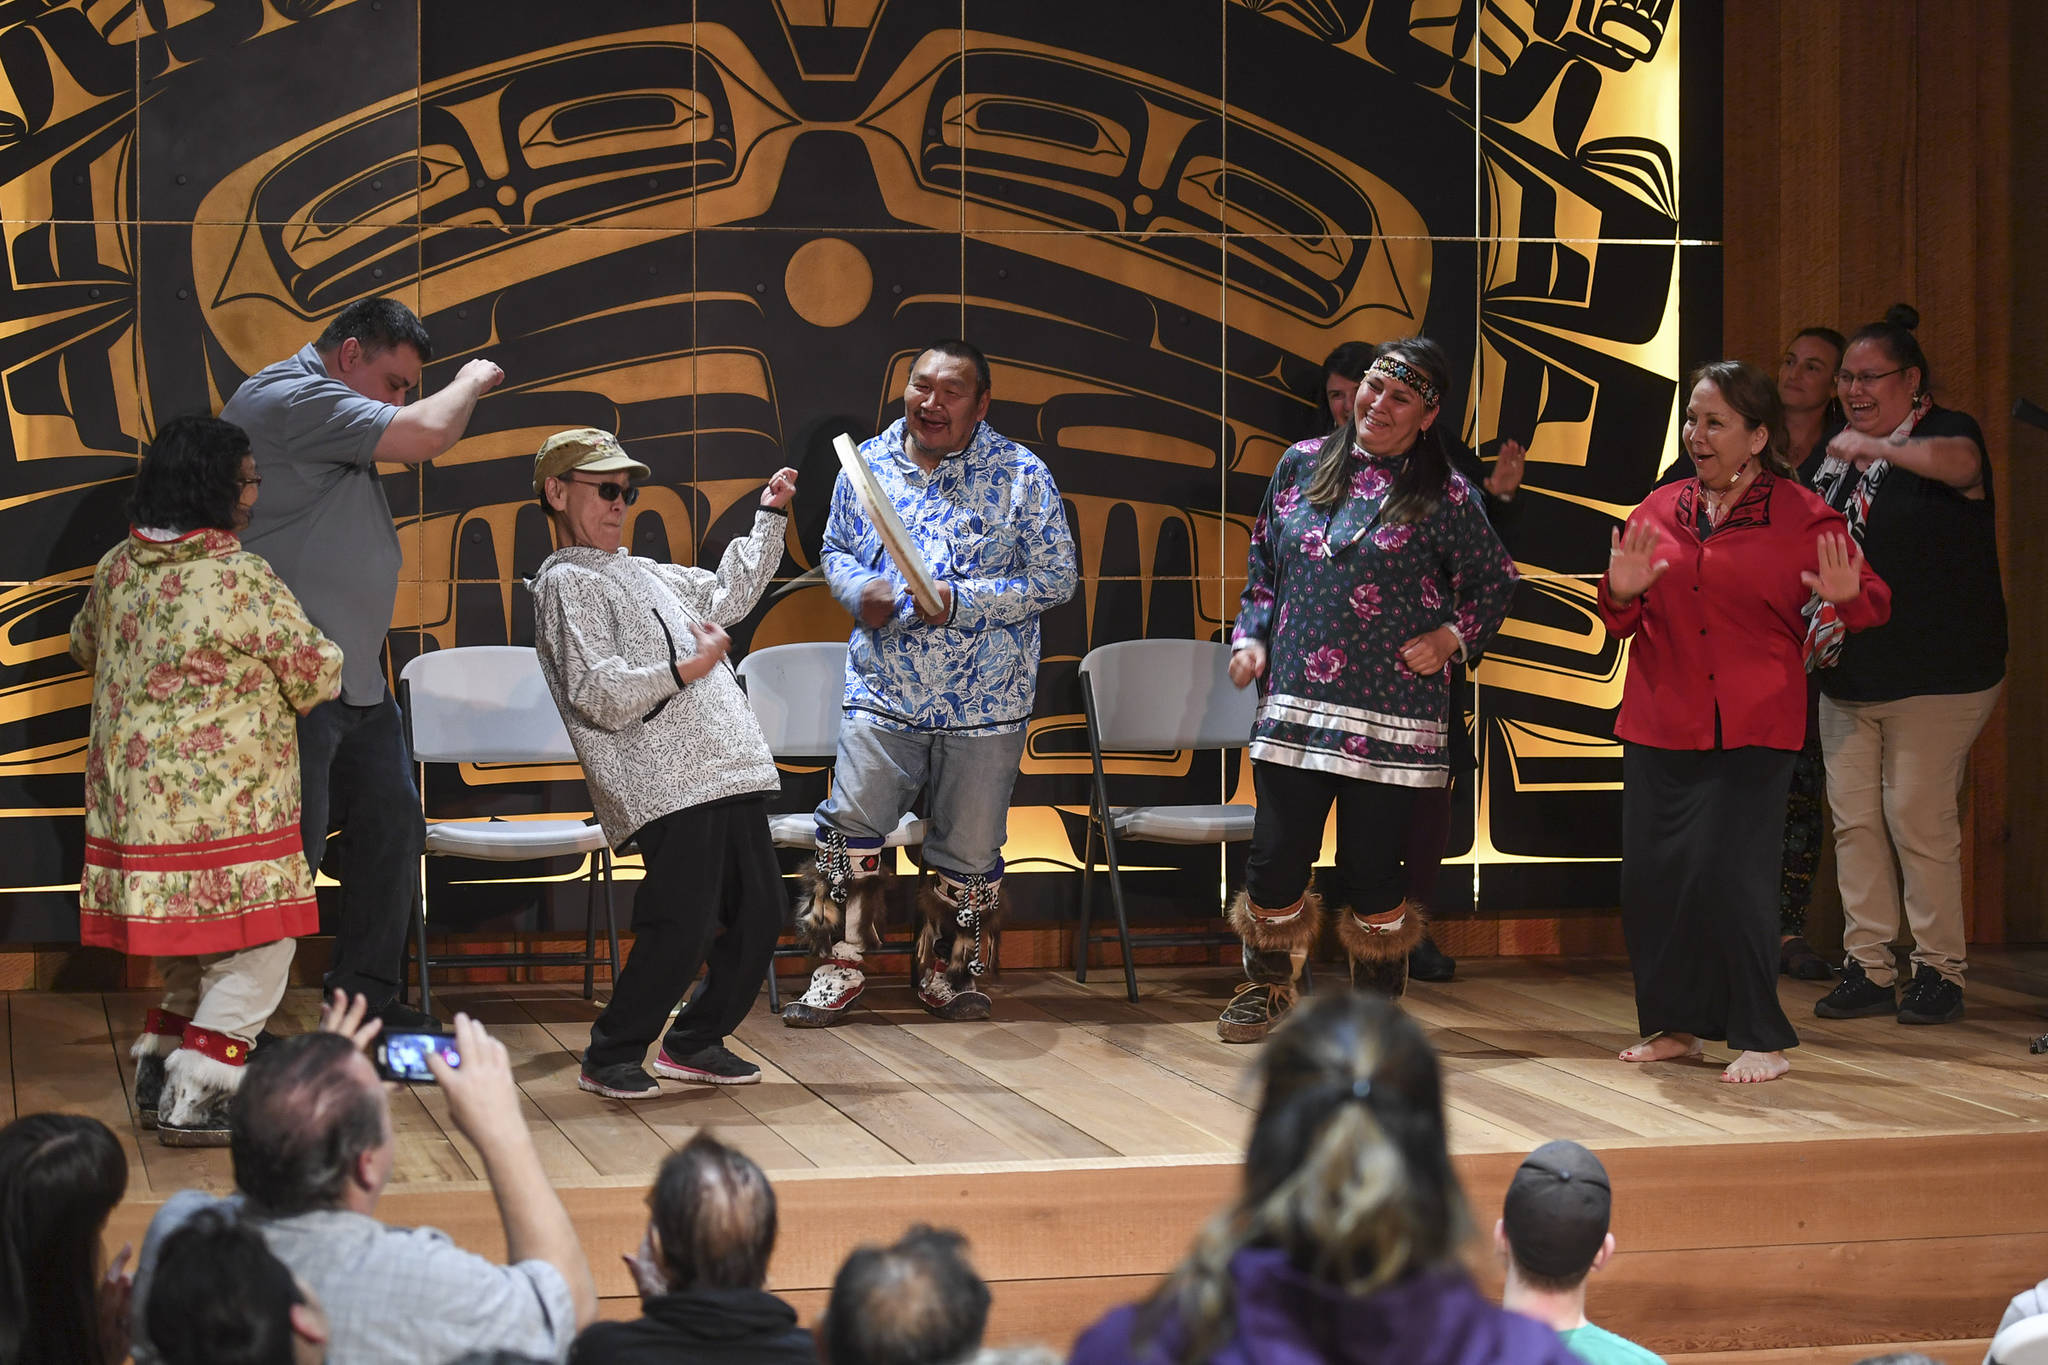 Sealaska Heritage Institute Artists-in-Residence John Waghiyi Jr. and his wife, Arlene Annogiyuk Waghiyi, from Savoonga, invite audience members to dance to their St. Lawrence Island rock and roll song at the Walter Soboleff Center on Wednesday, Aug. 28, 2019. (Michael Penn | Juneau Empire)